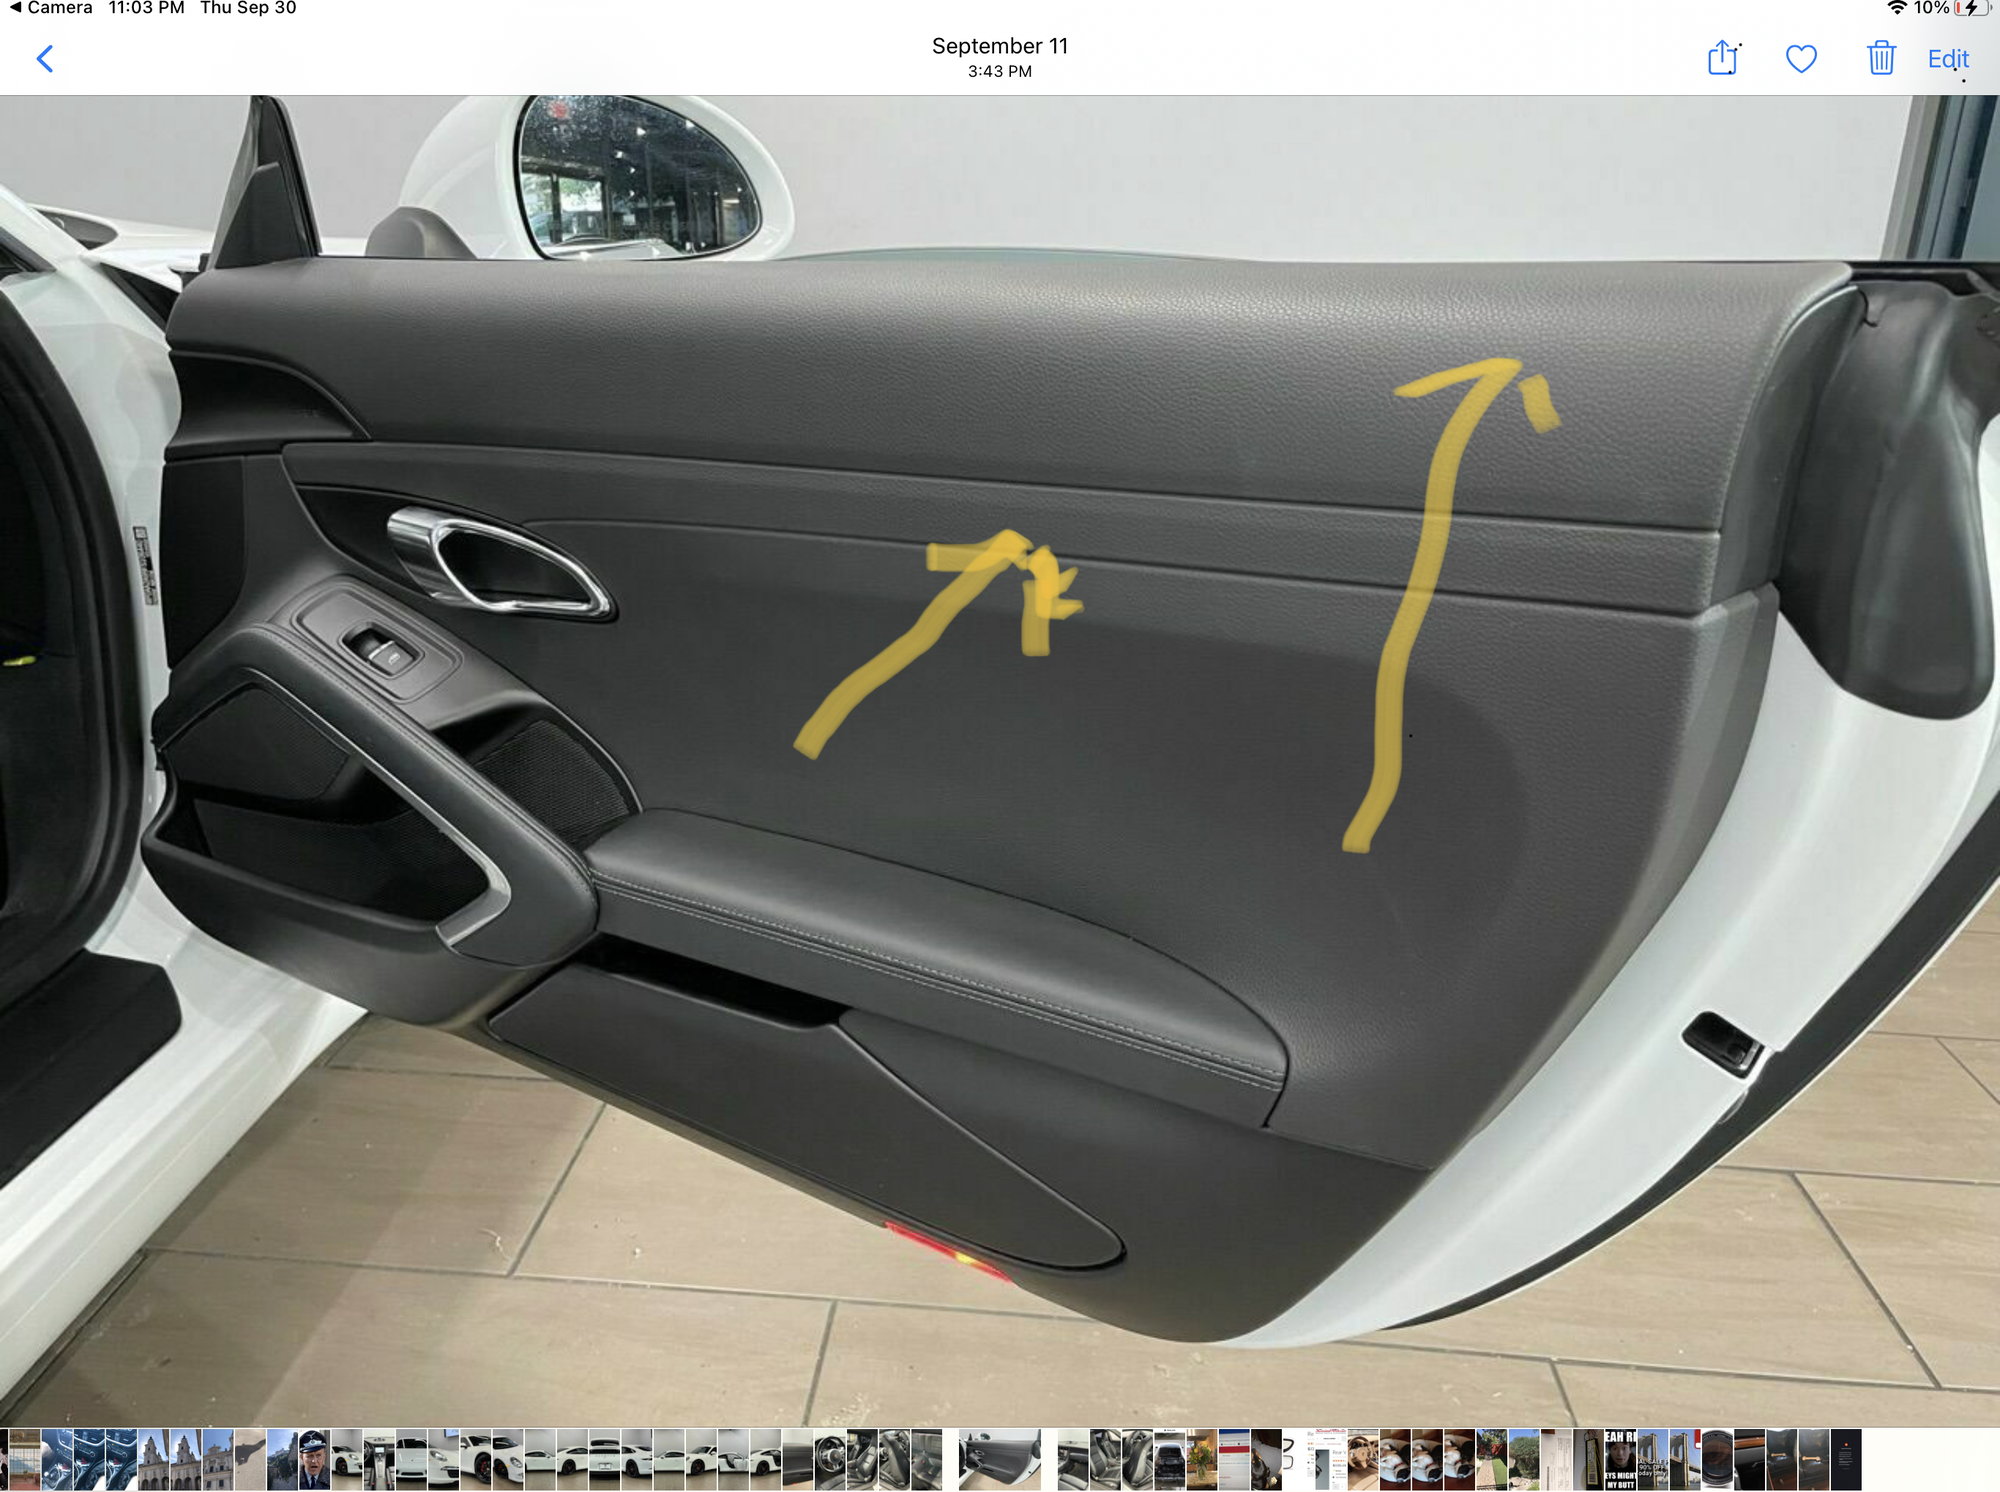 Can door panel pieces be separated? - Rennlist - Porsche Discussion Forums